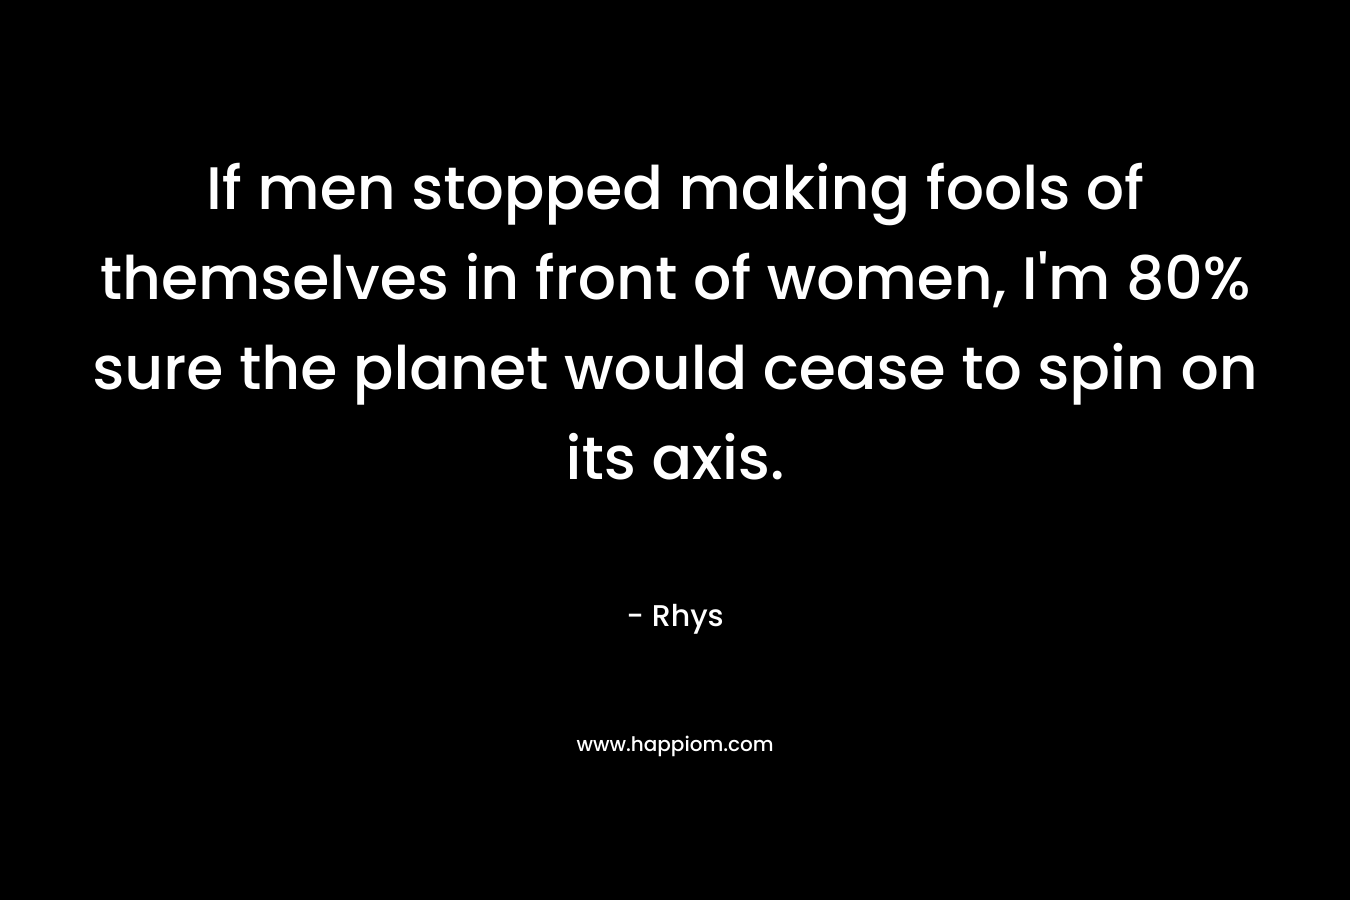 If men stopped making fools of themselves in front of women, I’m 80% sure the planet would cease to spin on its axis. – Rhys